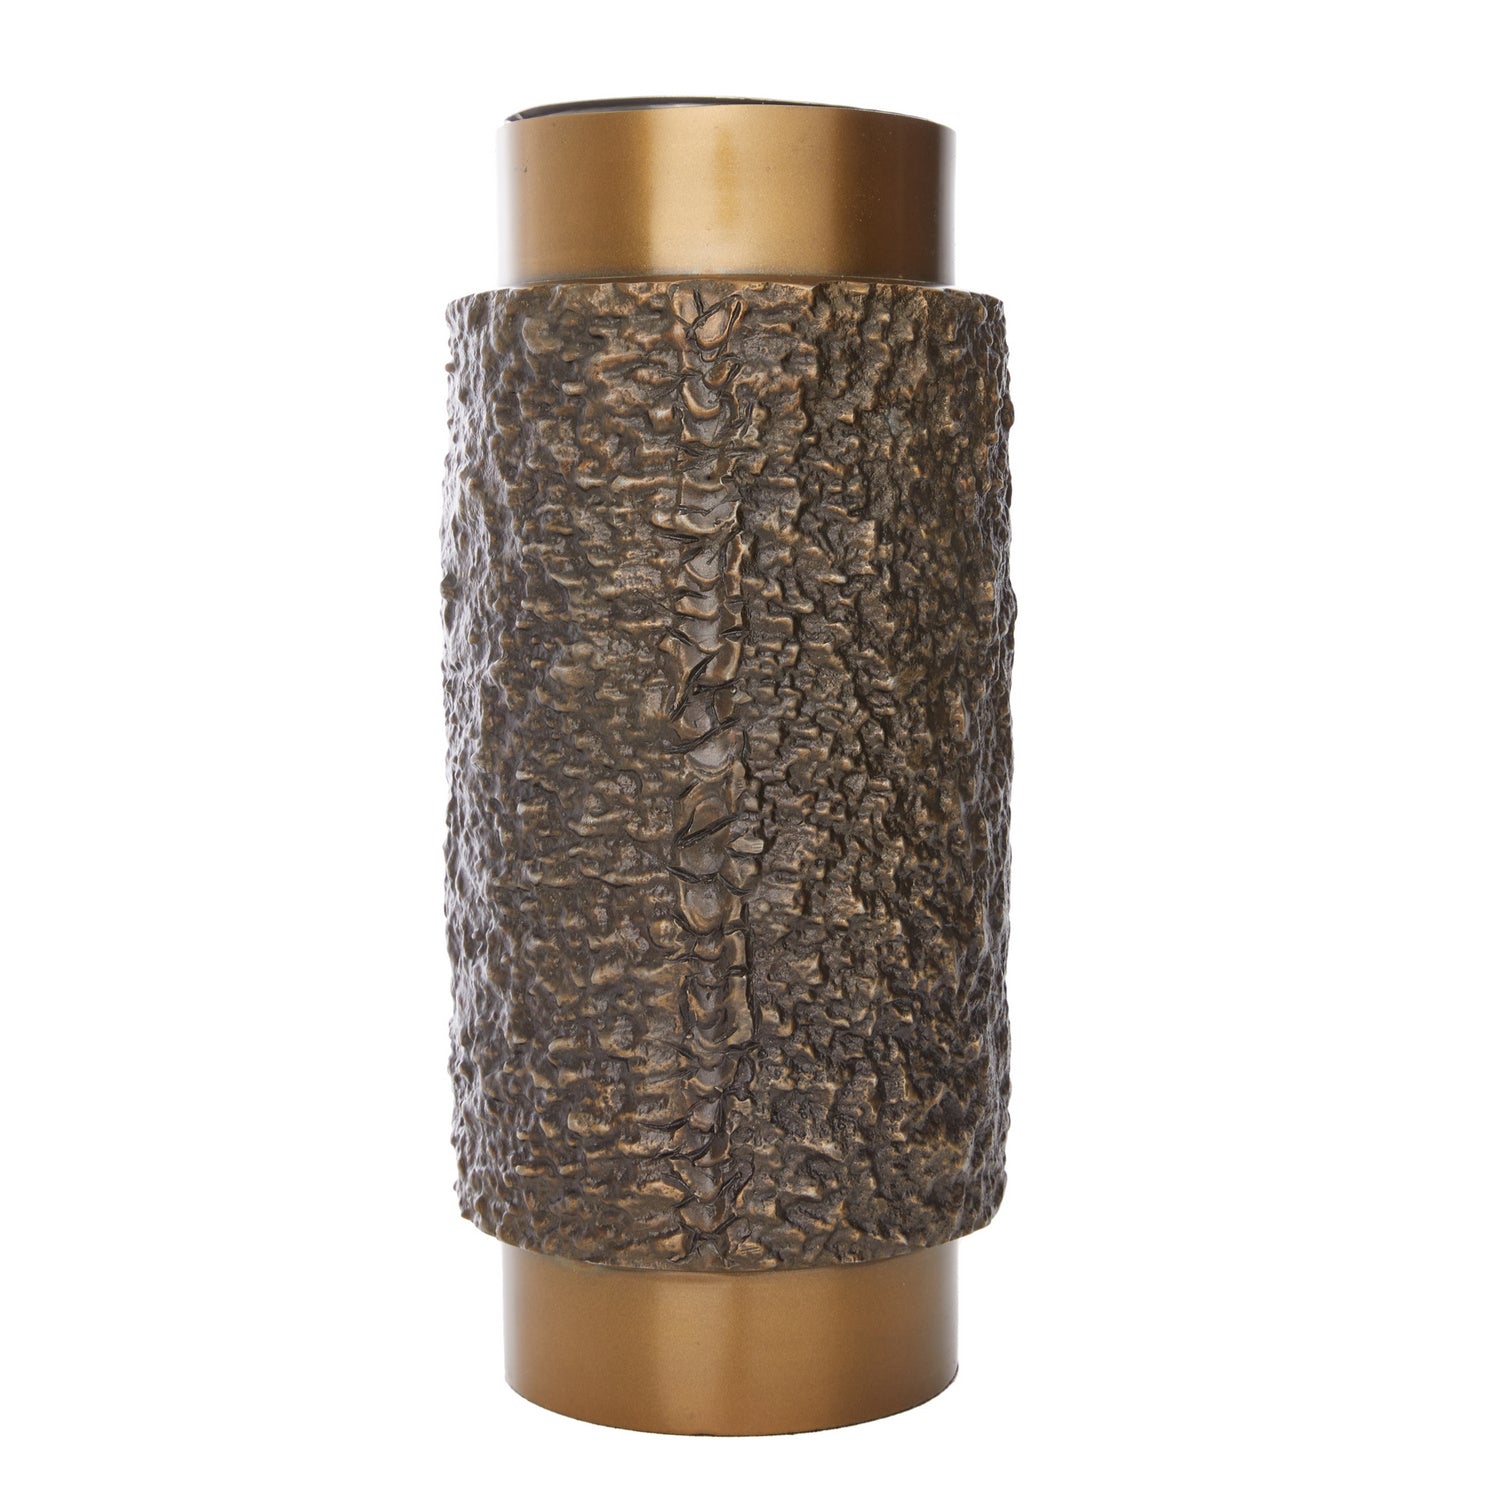 Vase from the Roderick collection in Antique Brass finish